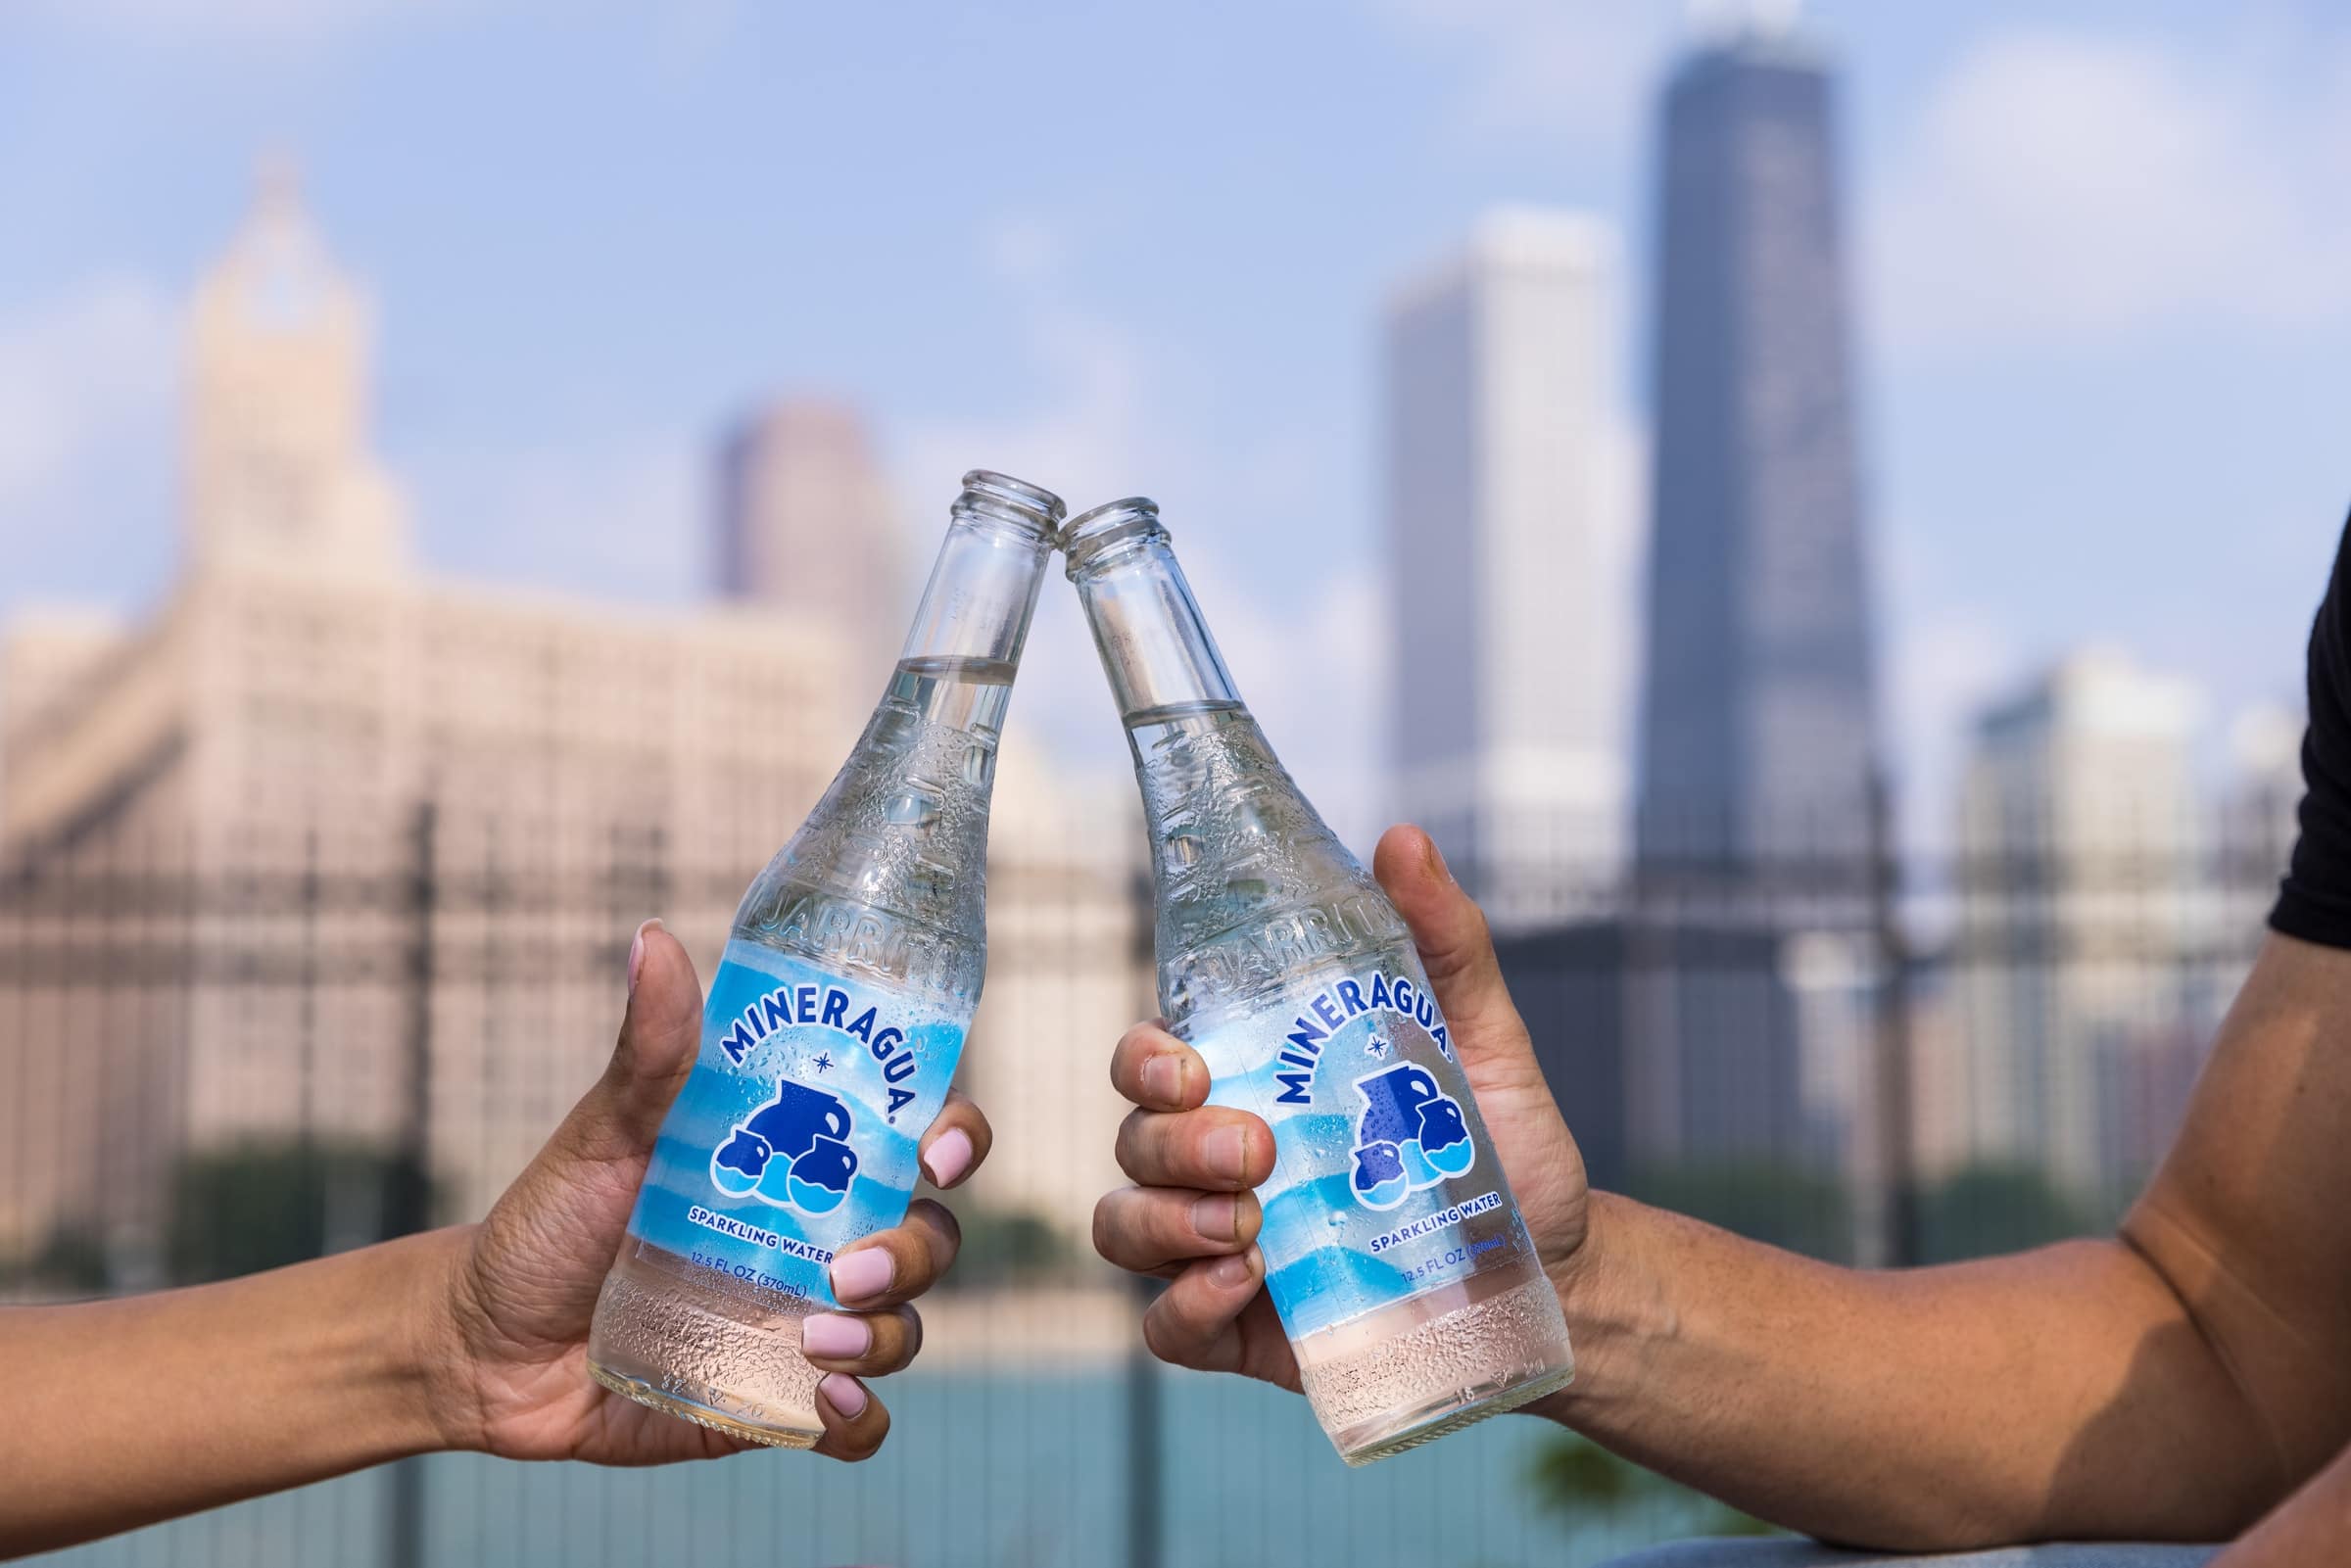 mineragua sparkling water can be used in low calorie cocktails